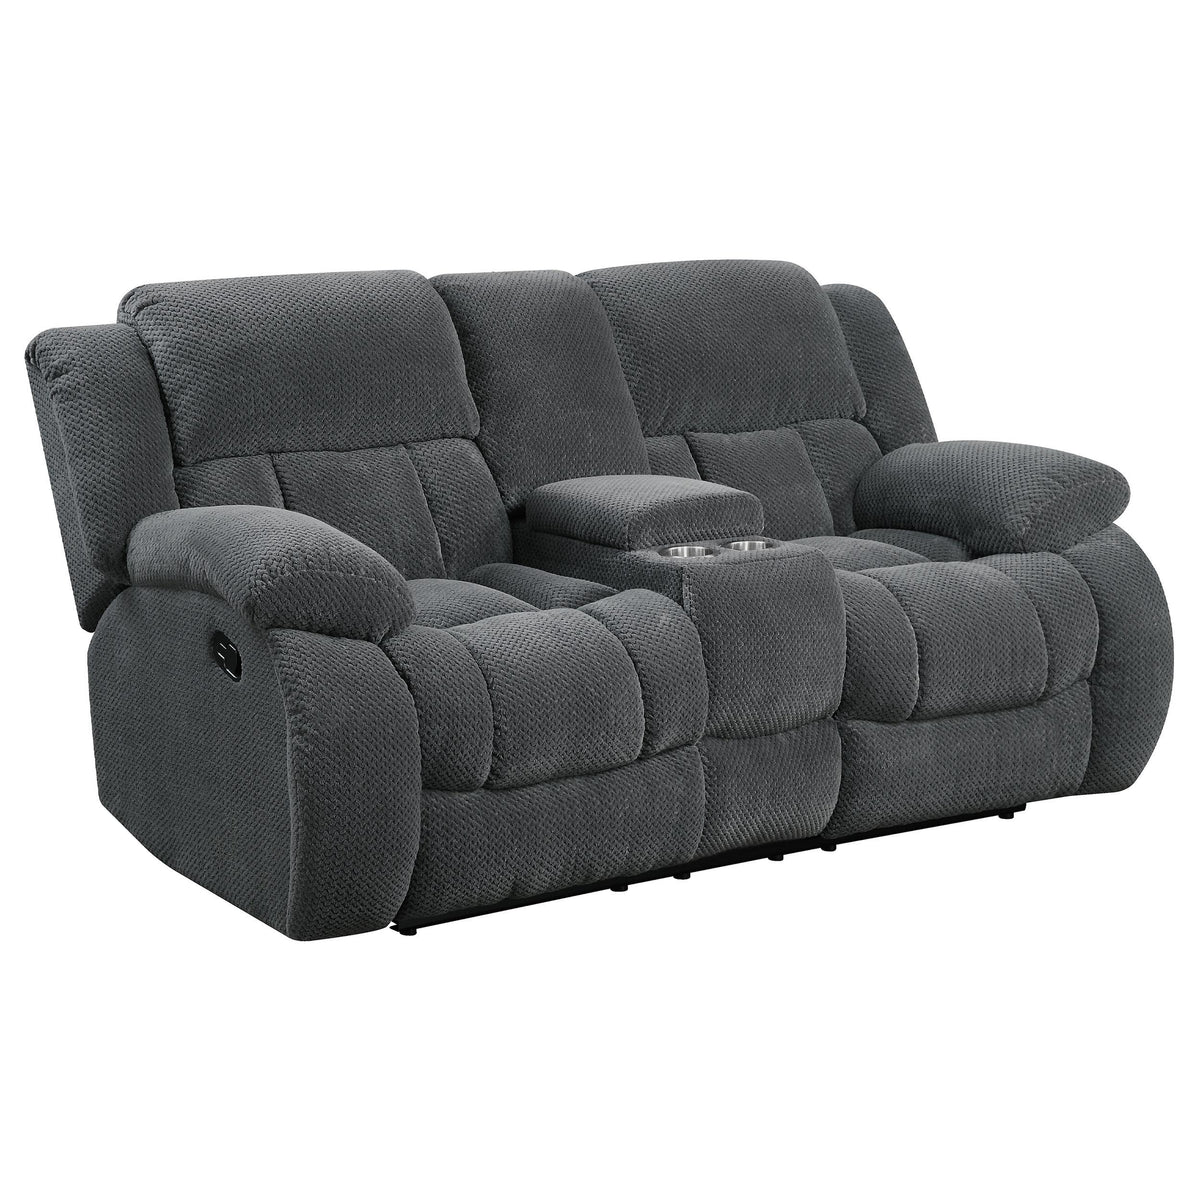 Weissman Motion Loveseat with Console Charcoal Weissman Motion Loveseat with Console Charcoal Half Price Furniture